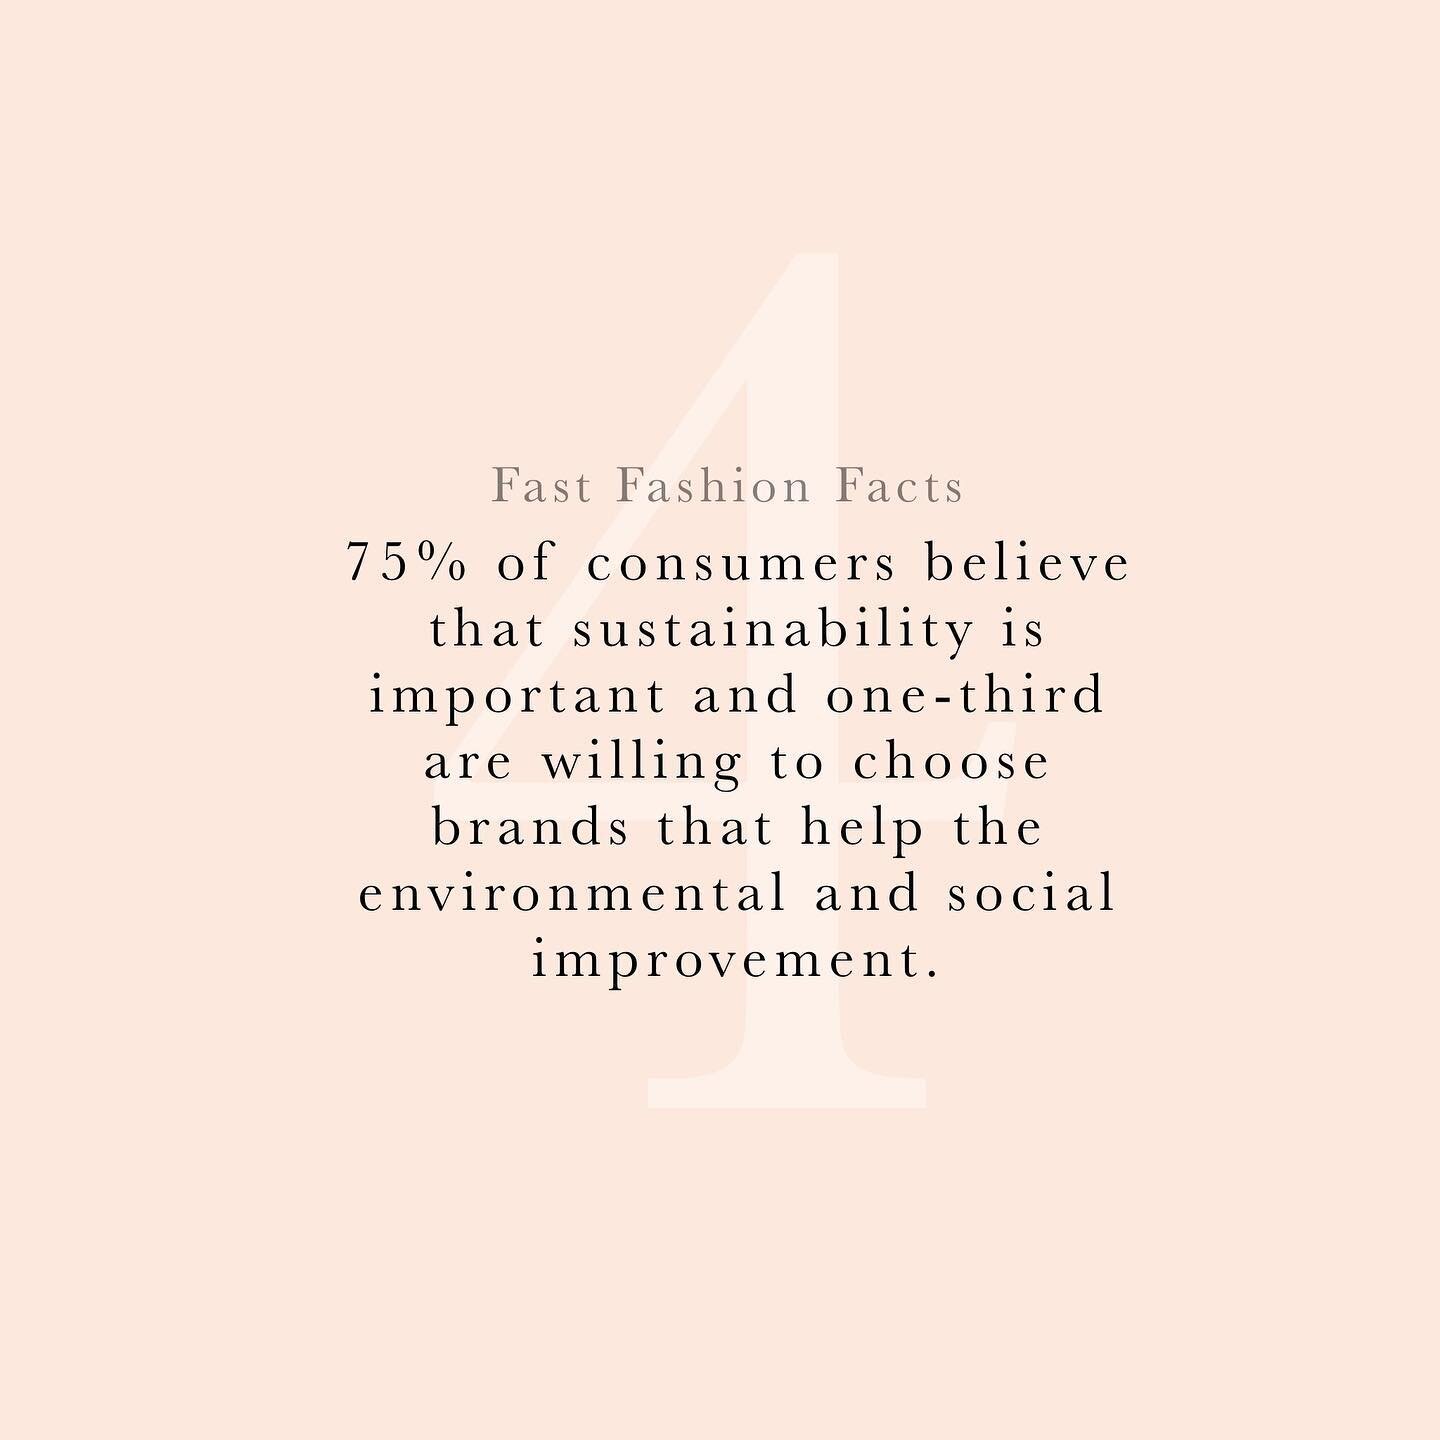 It&rsquo;s worth investing more money into clothing that is good quality and is sustainable for our environment.
&bull;
&bull;
&bull;
#fashiondesigner #fashiondesign #fashionstyle #fashionblog #instafashion #ootd #style #instablog #fashionphotography